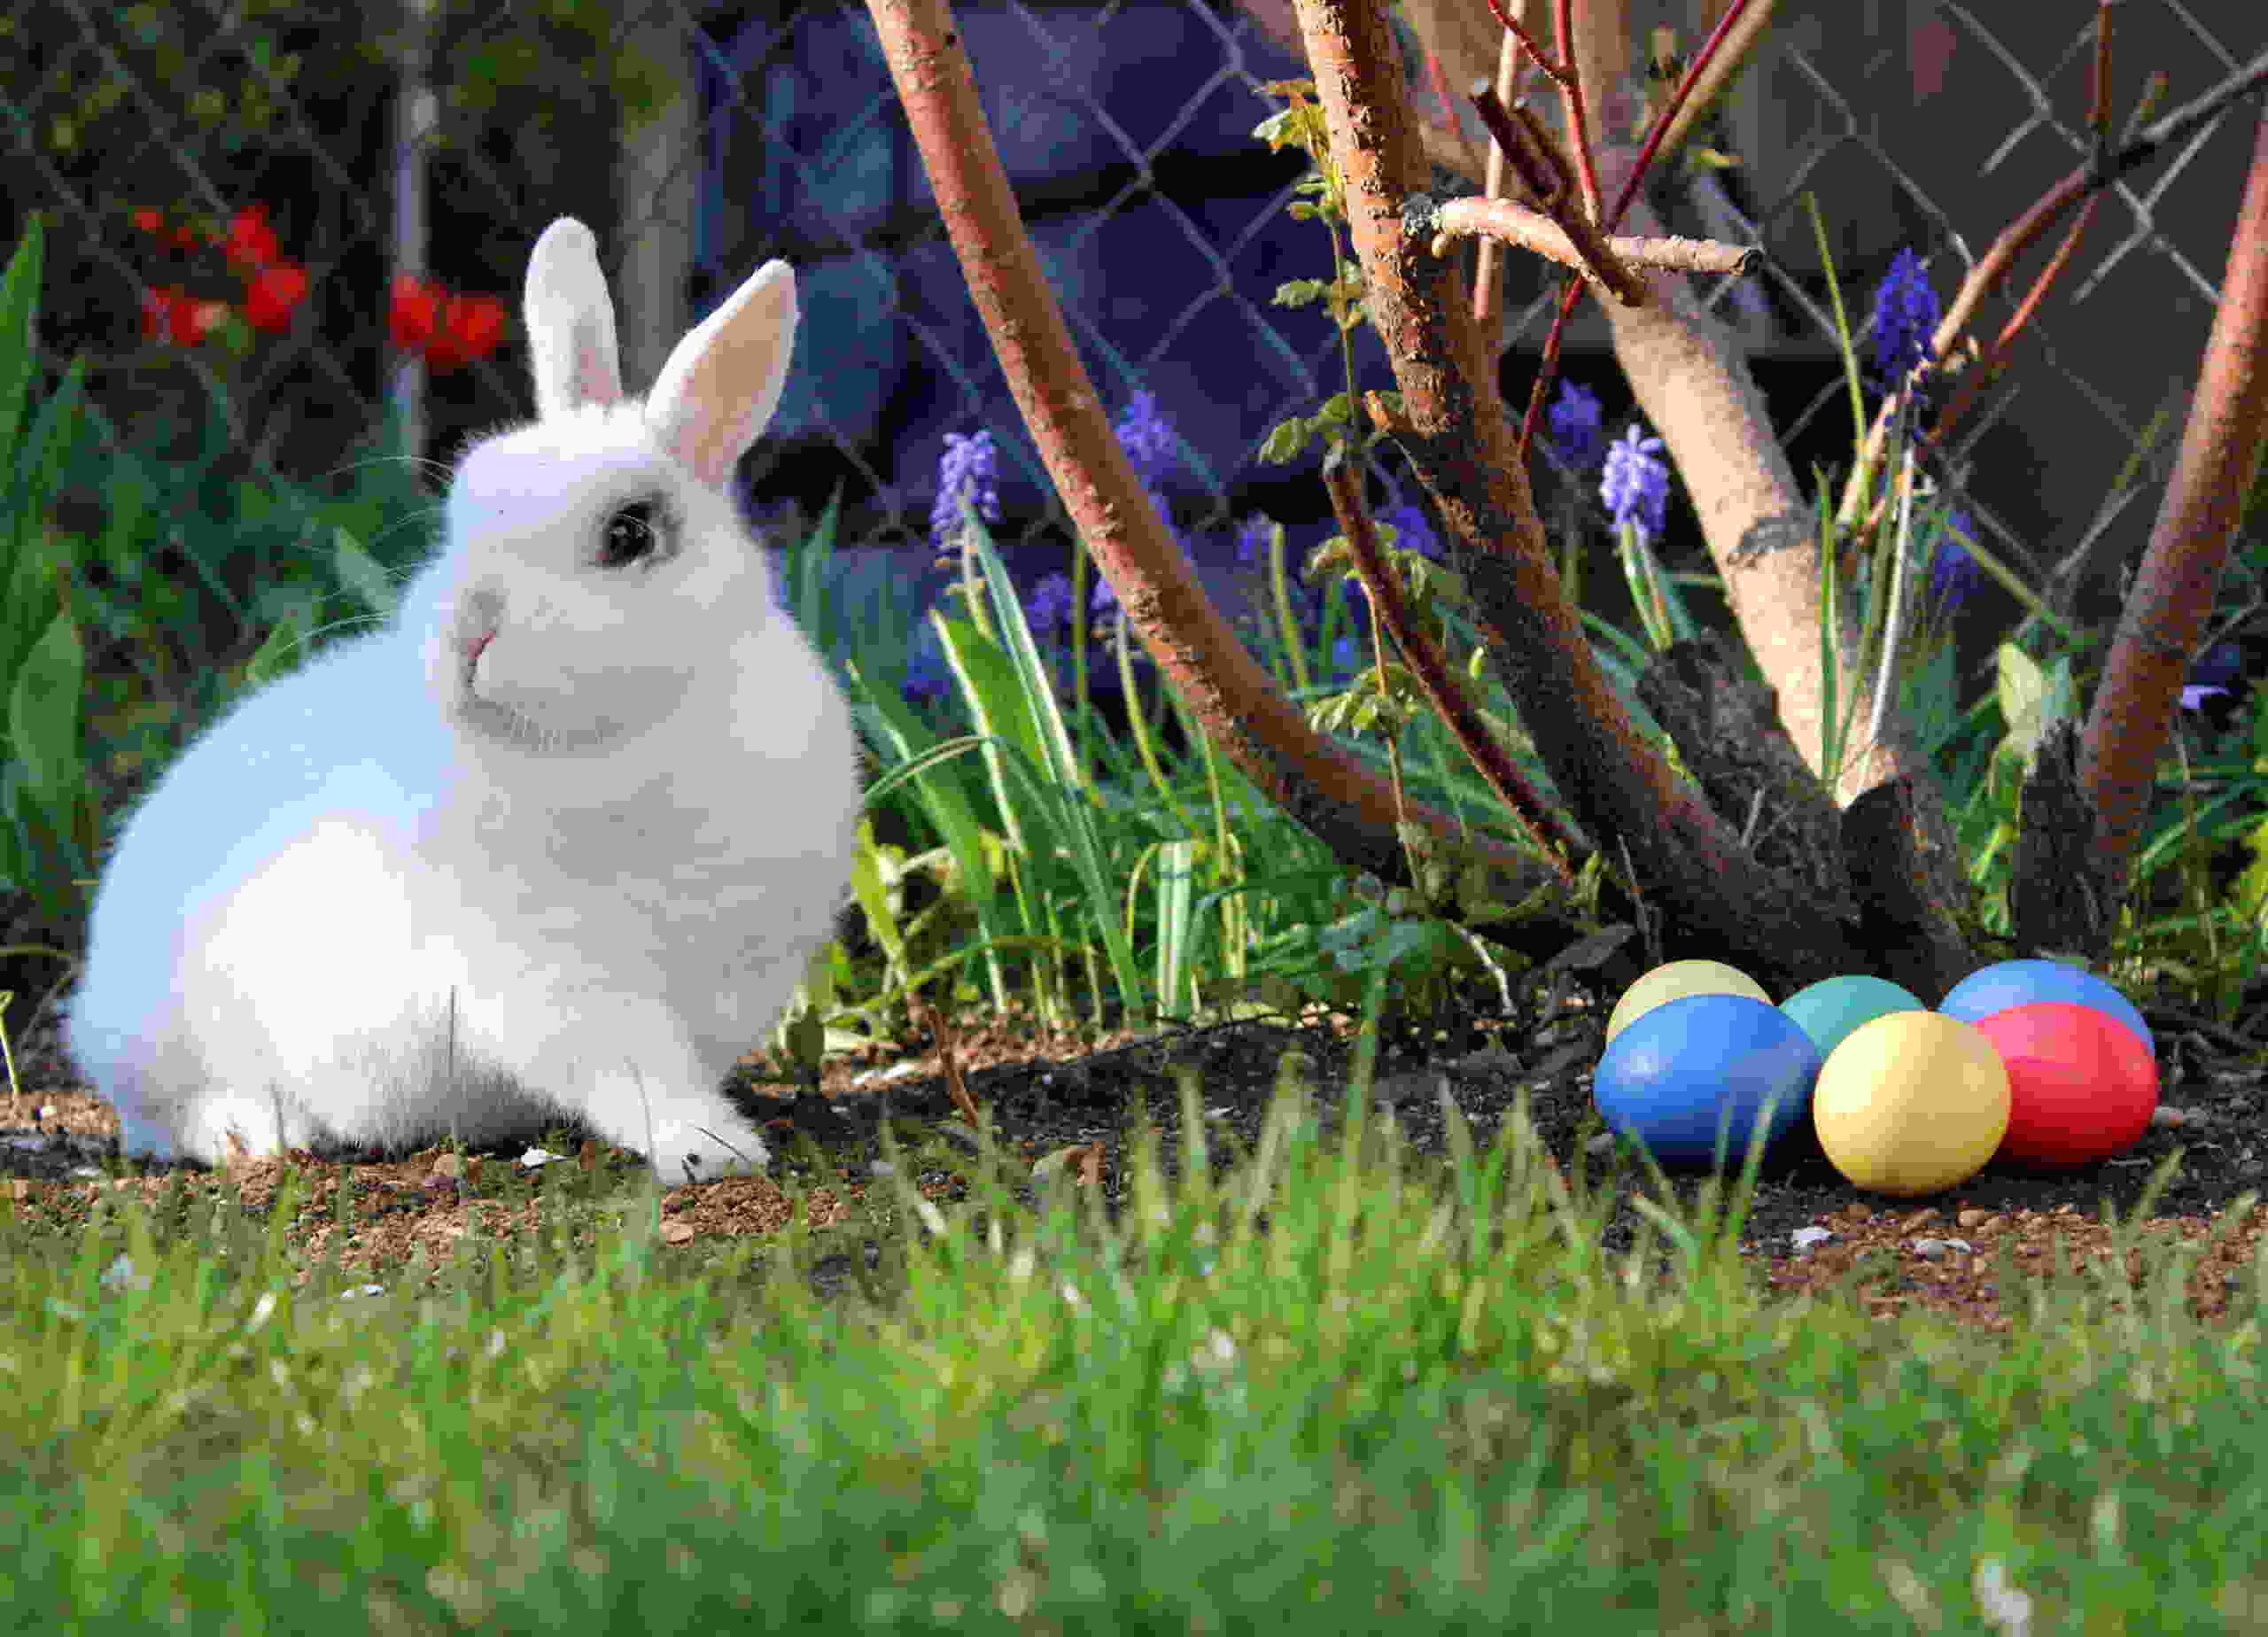 White hare near colourfully dyed eggs